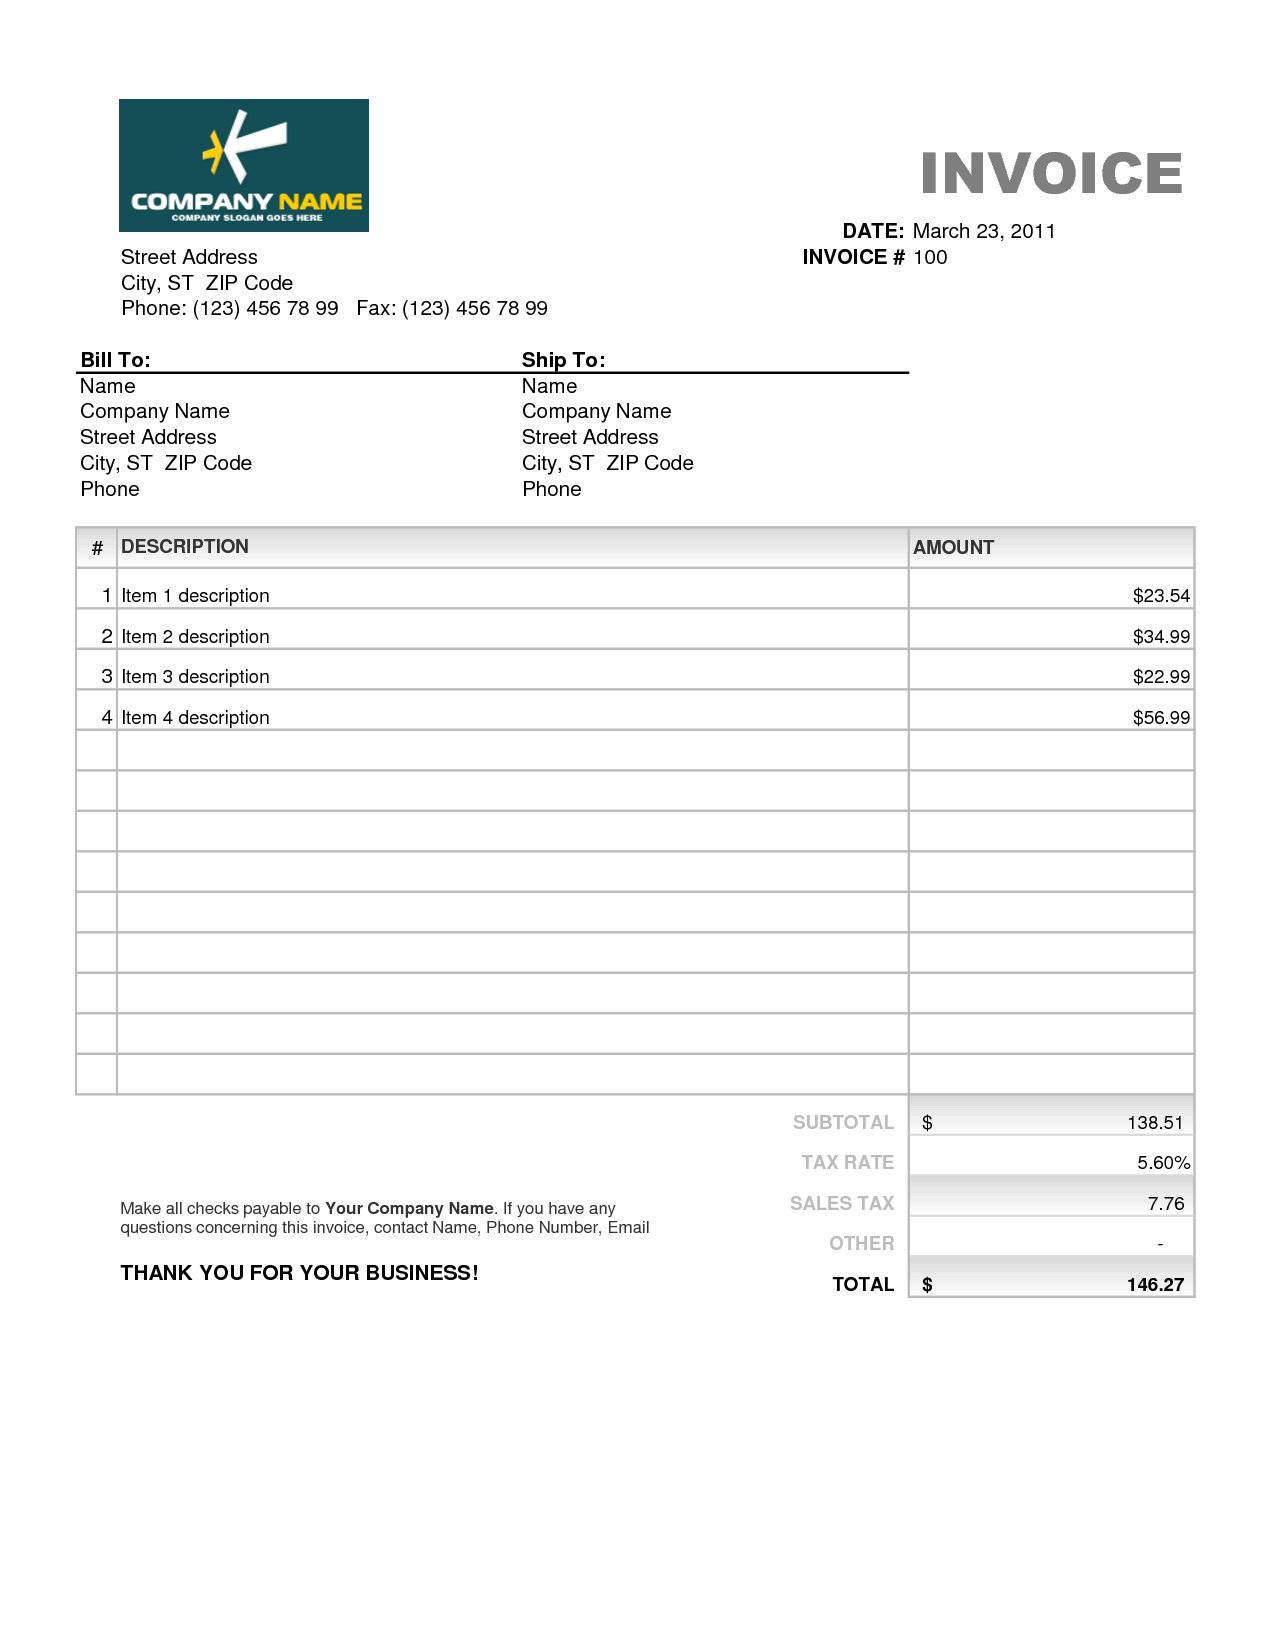 Sample Invoice Template Excel Invoice Example